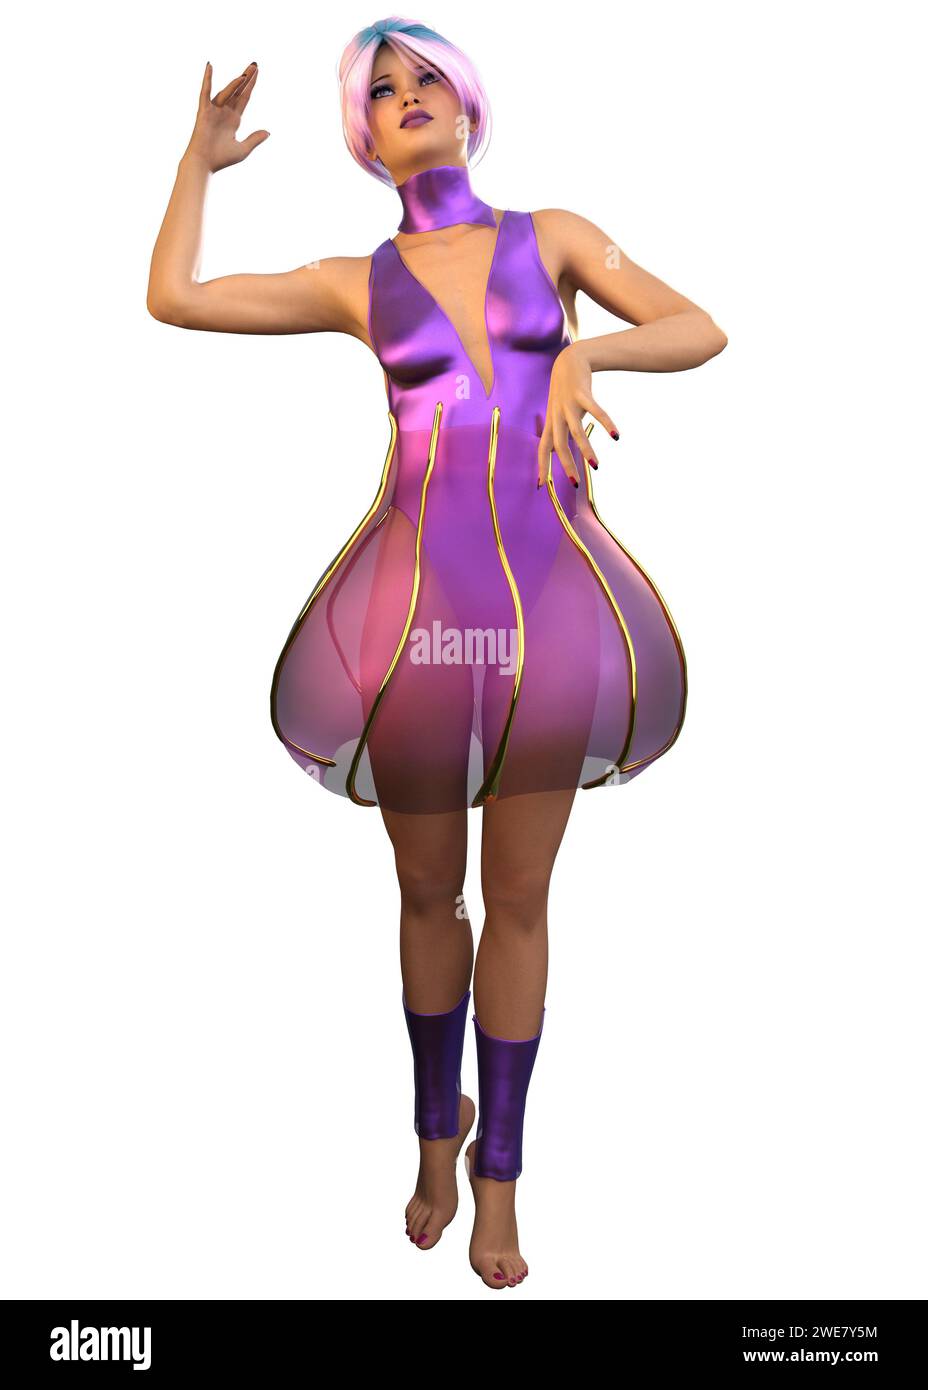 Fantasy girl dancing in purple outfit, 3D Illustration. Stock Photo